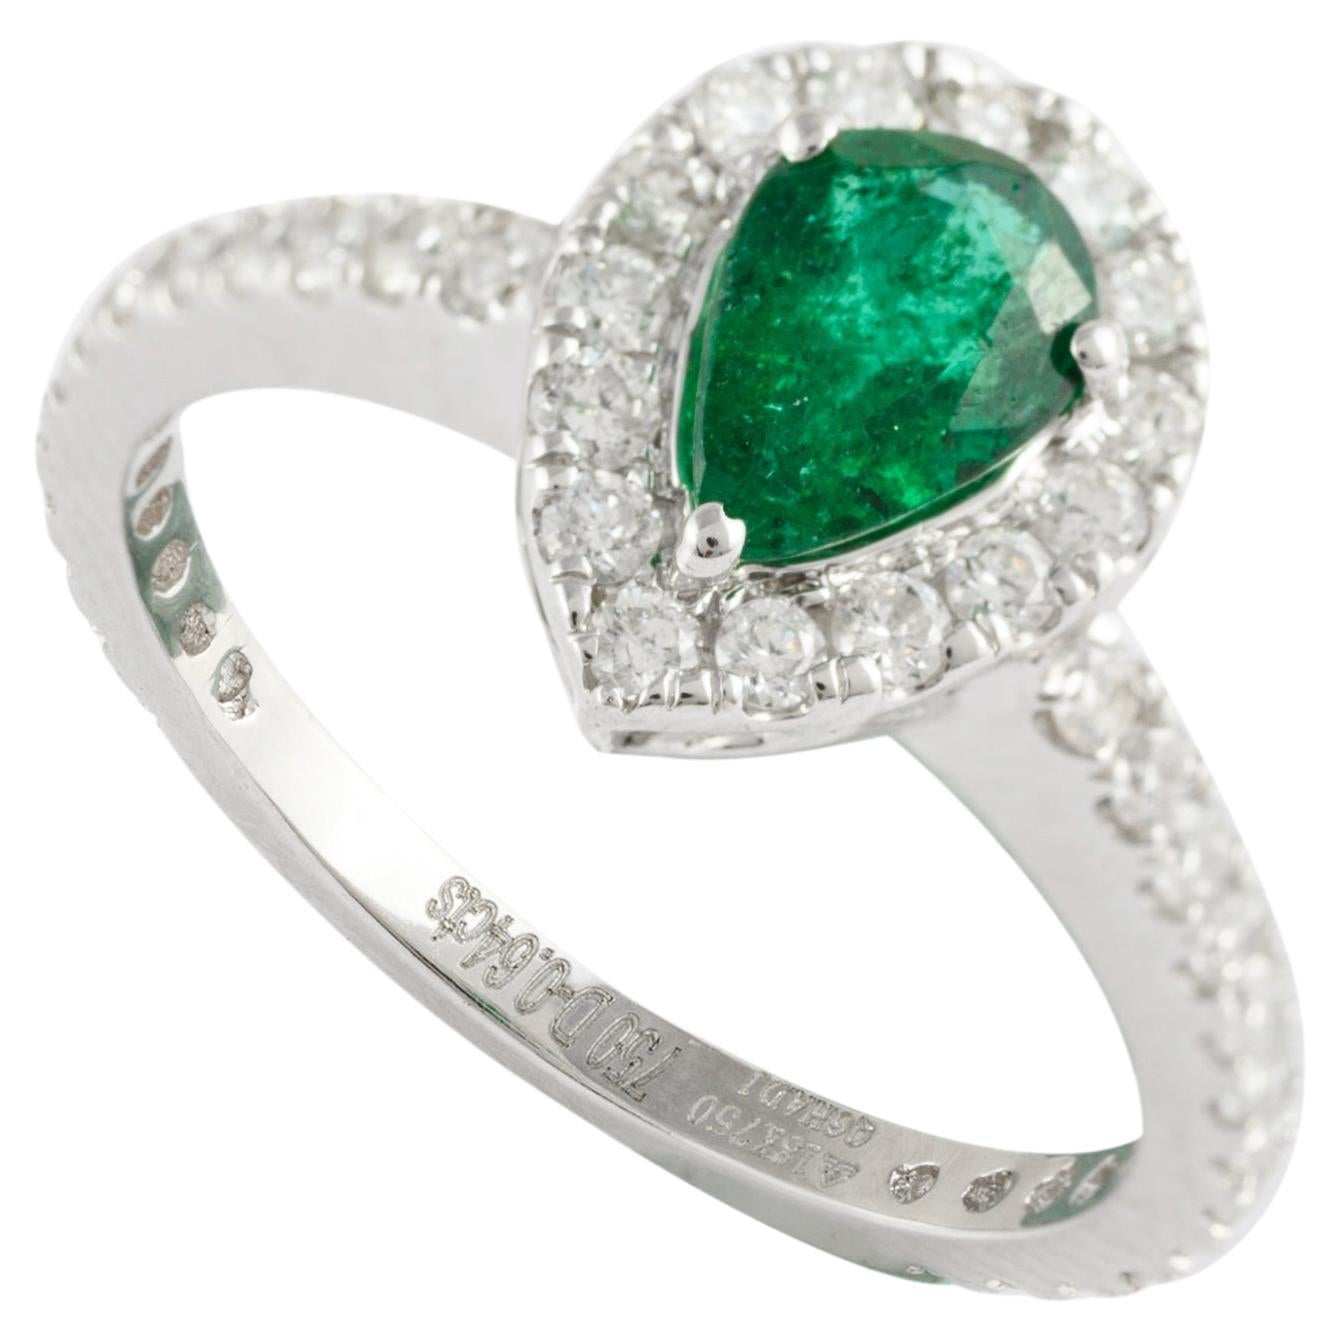 For Sale:  Exclusive 18k Solid White Gold Halo Diamond Natural Pear Cut Emerald Ring